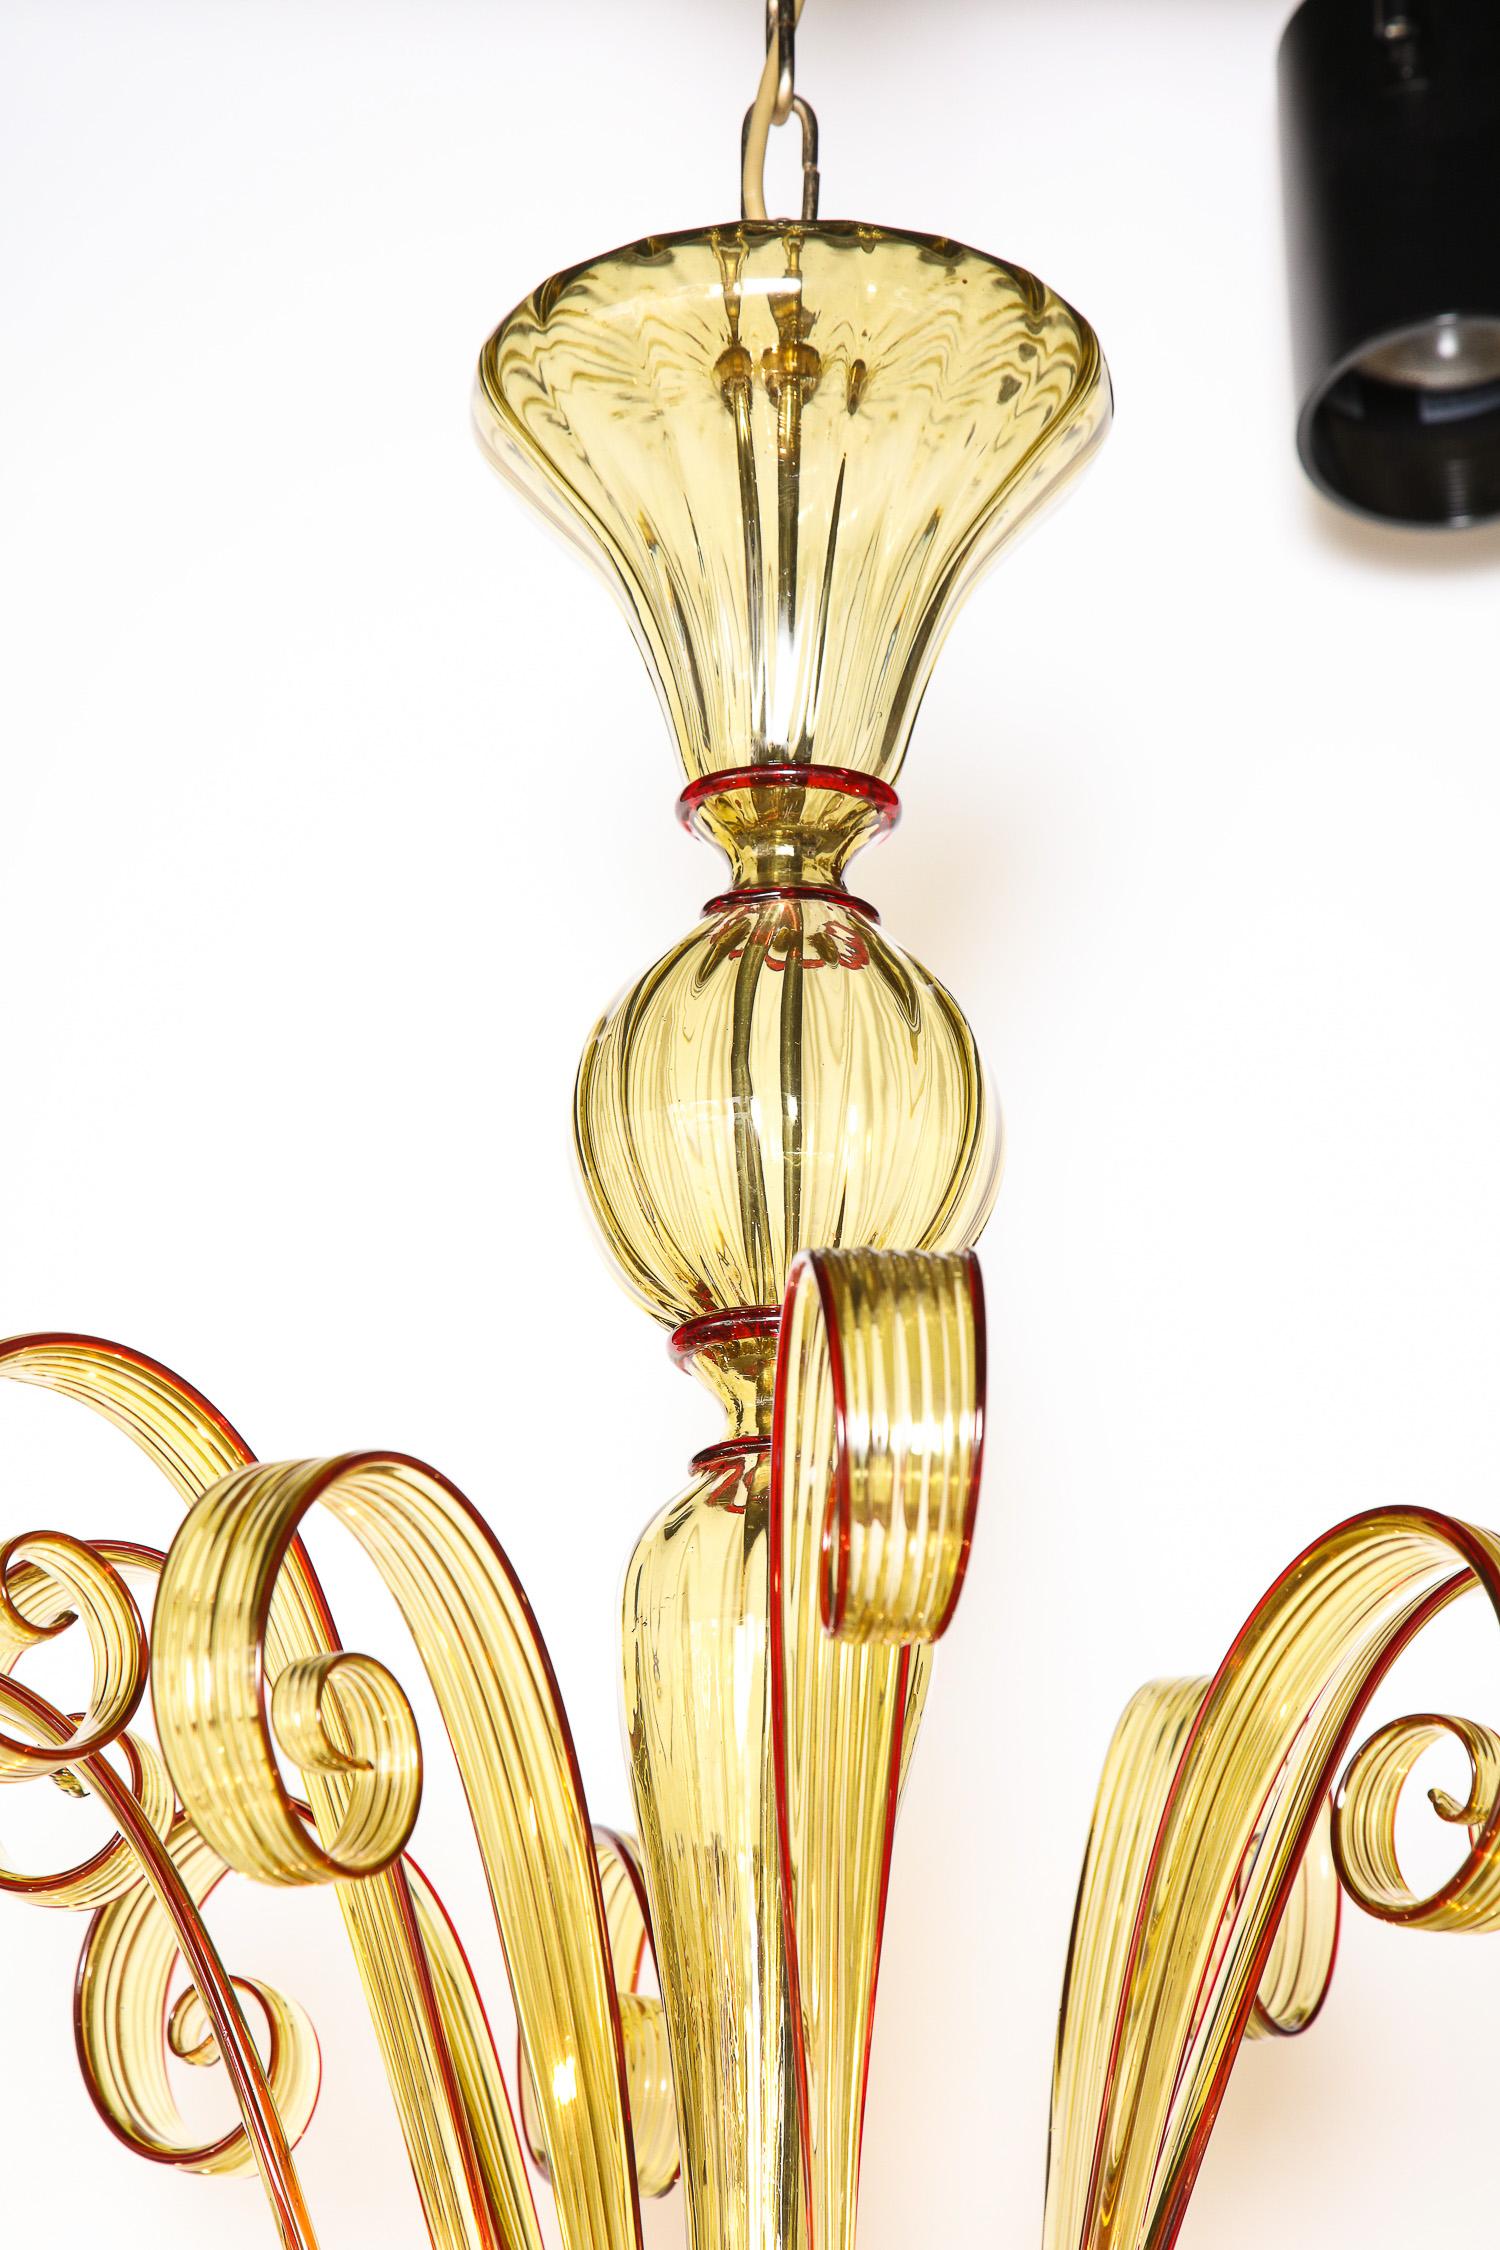 Venetian Glass Chandelier, Amber Color/Red, Contemporary, 8 Arms, Murano, Italy In Good Condition For Sale In New York, NY